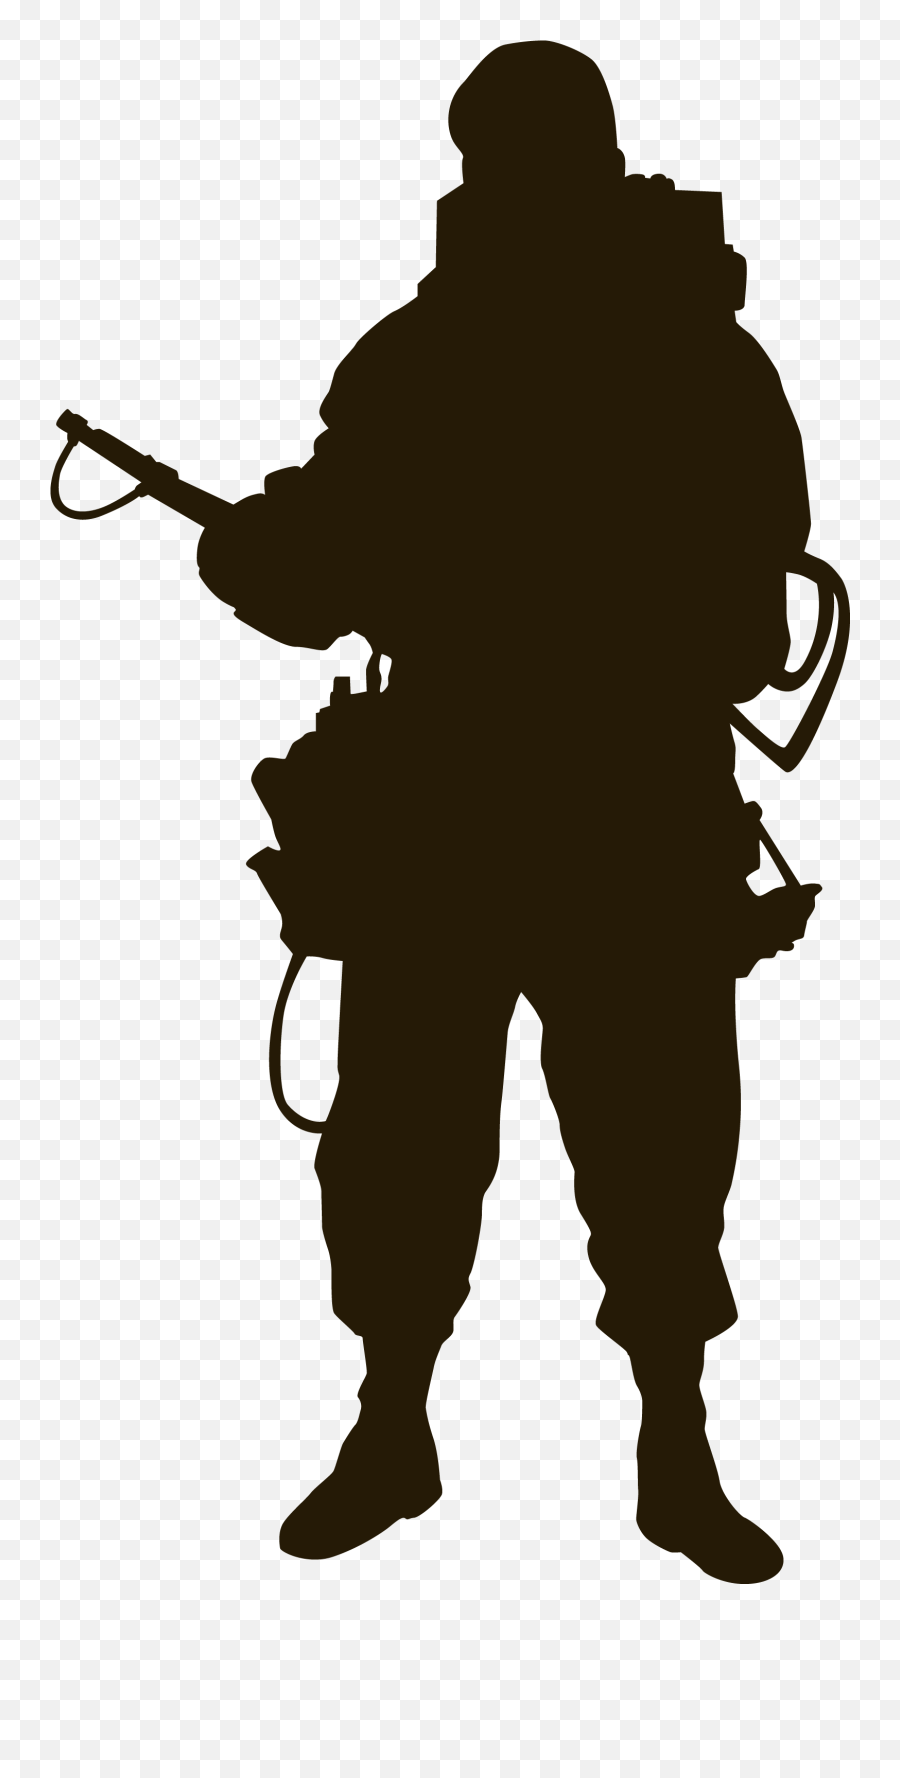 Download Ghostbusters Svg Silhouette - Ghostbusters Svg Png,Ghostbusters Png